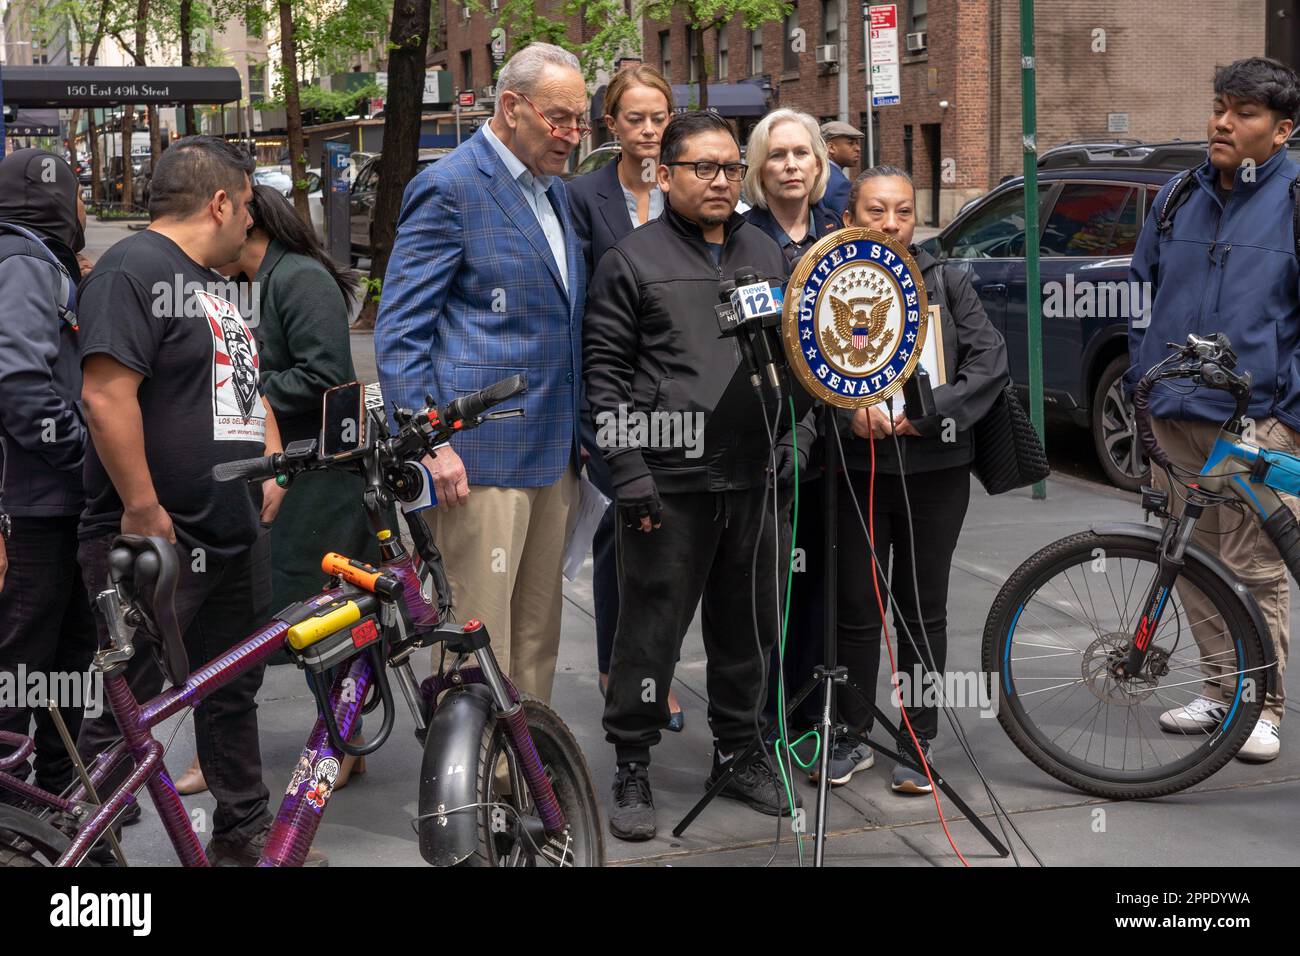 Alfonso Villa Munoz, father of Stephanie Villa Torres who lost her life in a battery fire, speaks at a press conference on regulating standards for Lithium-Ion Batteries used in e-bikes and e-scooters in New York City. Senate Majority Leader Chuck Schumer joined by U.S. Senator Kirsten Gillibrand and Fire Department of New York (FDNY) Commissioner Laura Kavanagh push for legislation that would regulate Lithium-ion batteries amidst a rash of recent related fires. The Fire Department of New York reports Rechargeable Lithium-Ion Batteries have caused more than 400 fires over last four years, res Stock Photo